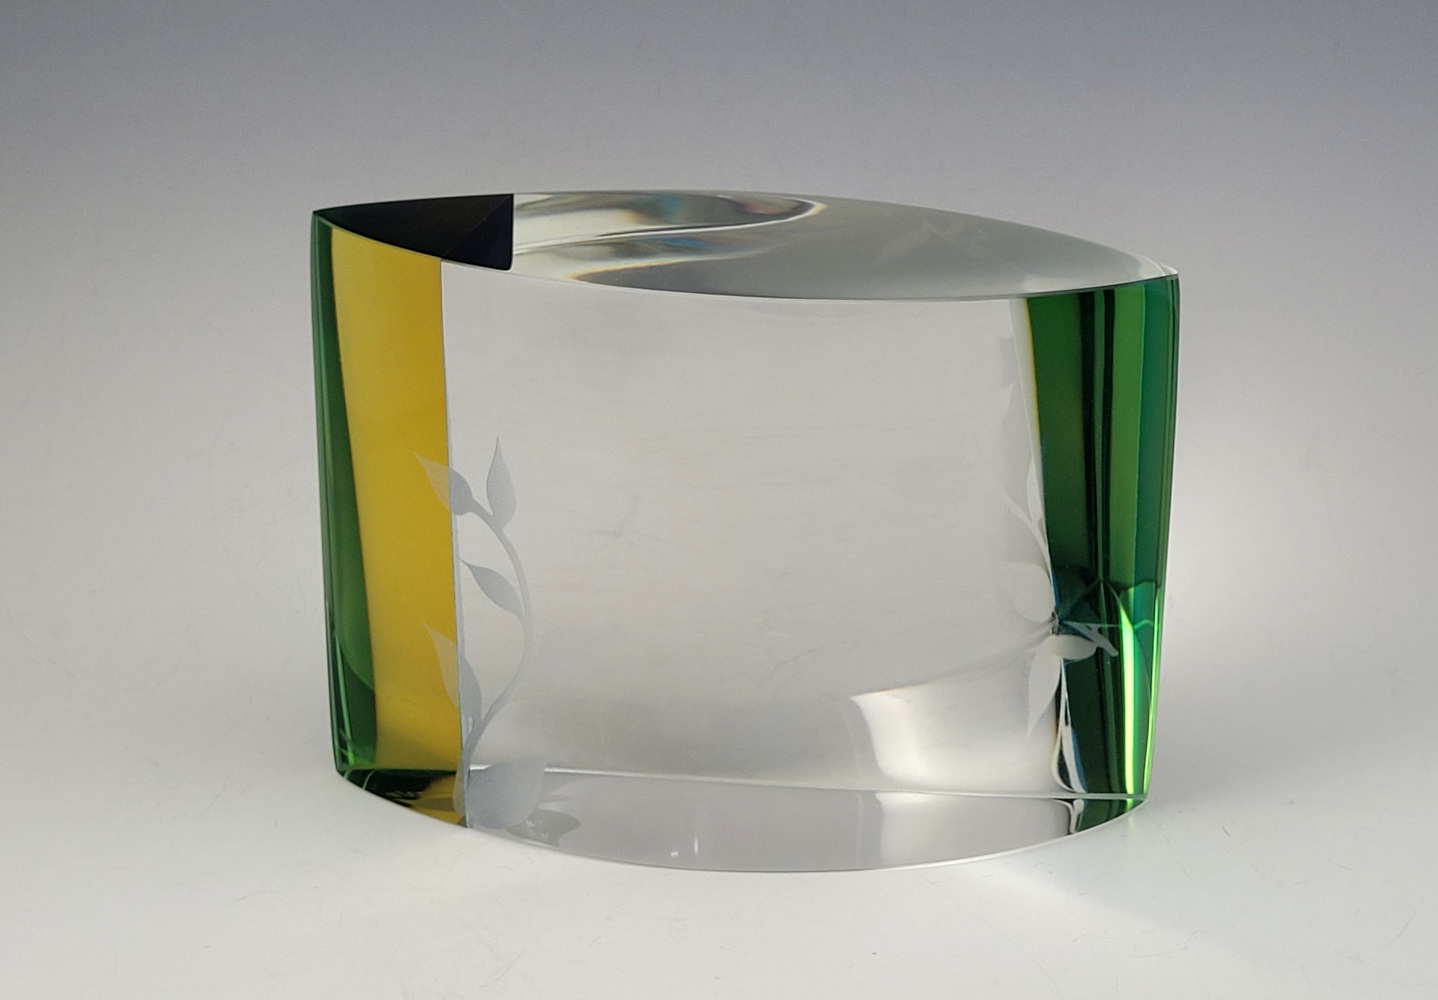 Daybreak, Laminated Solid Glass Sculpture